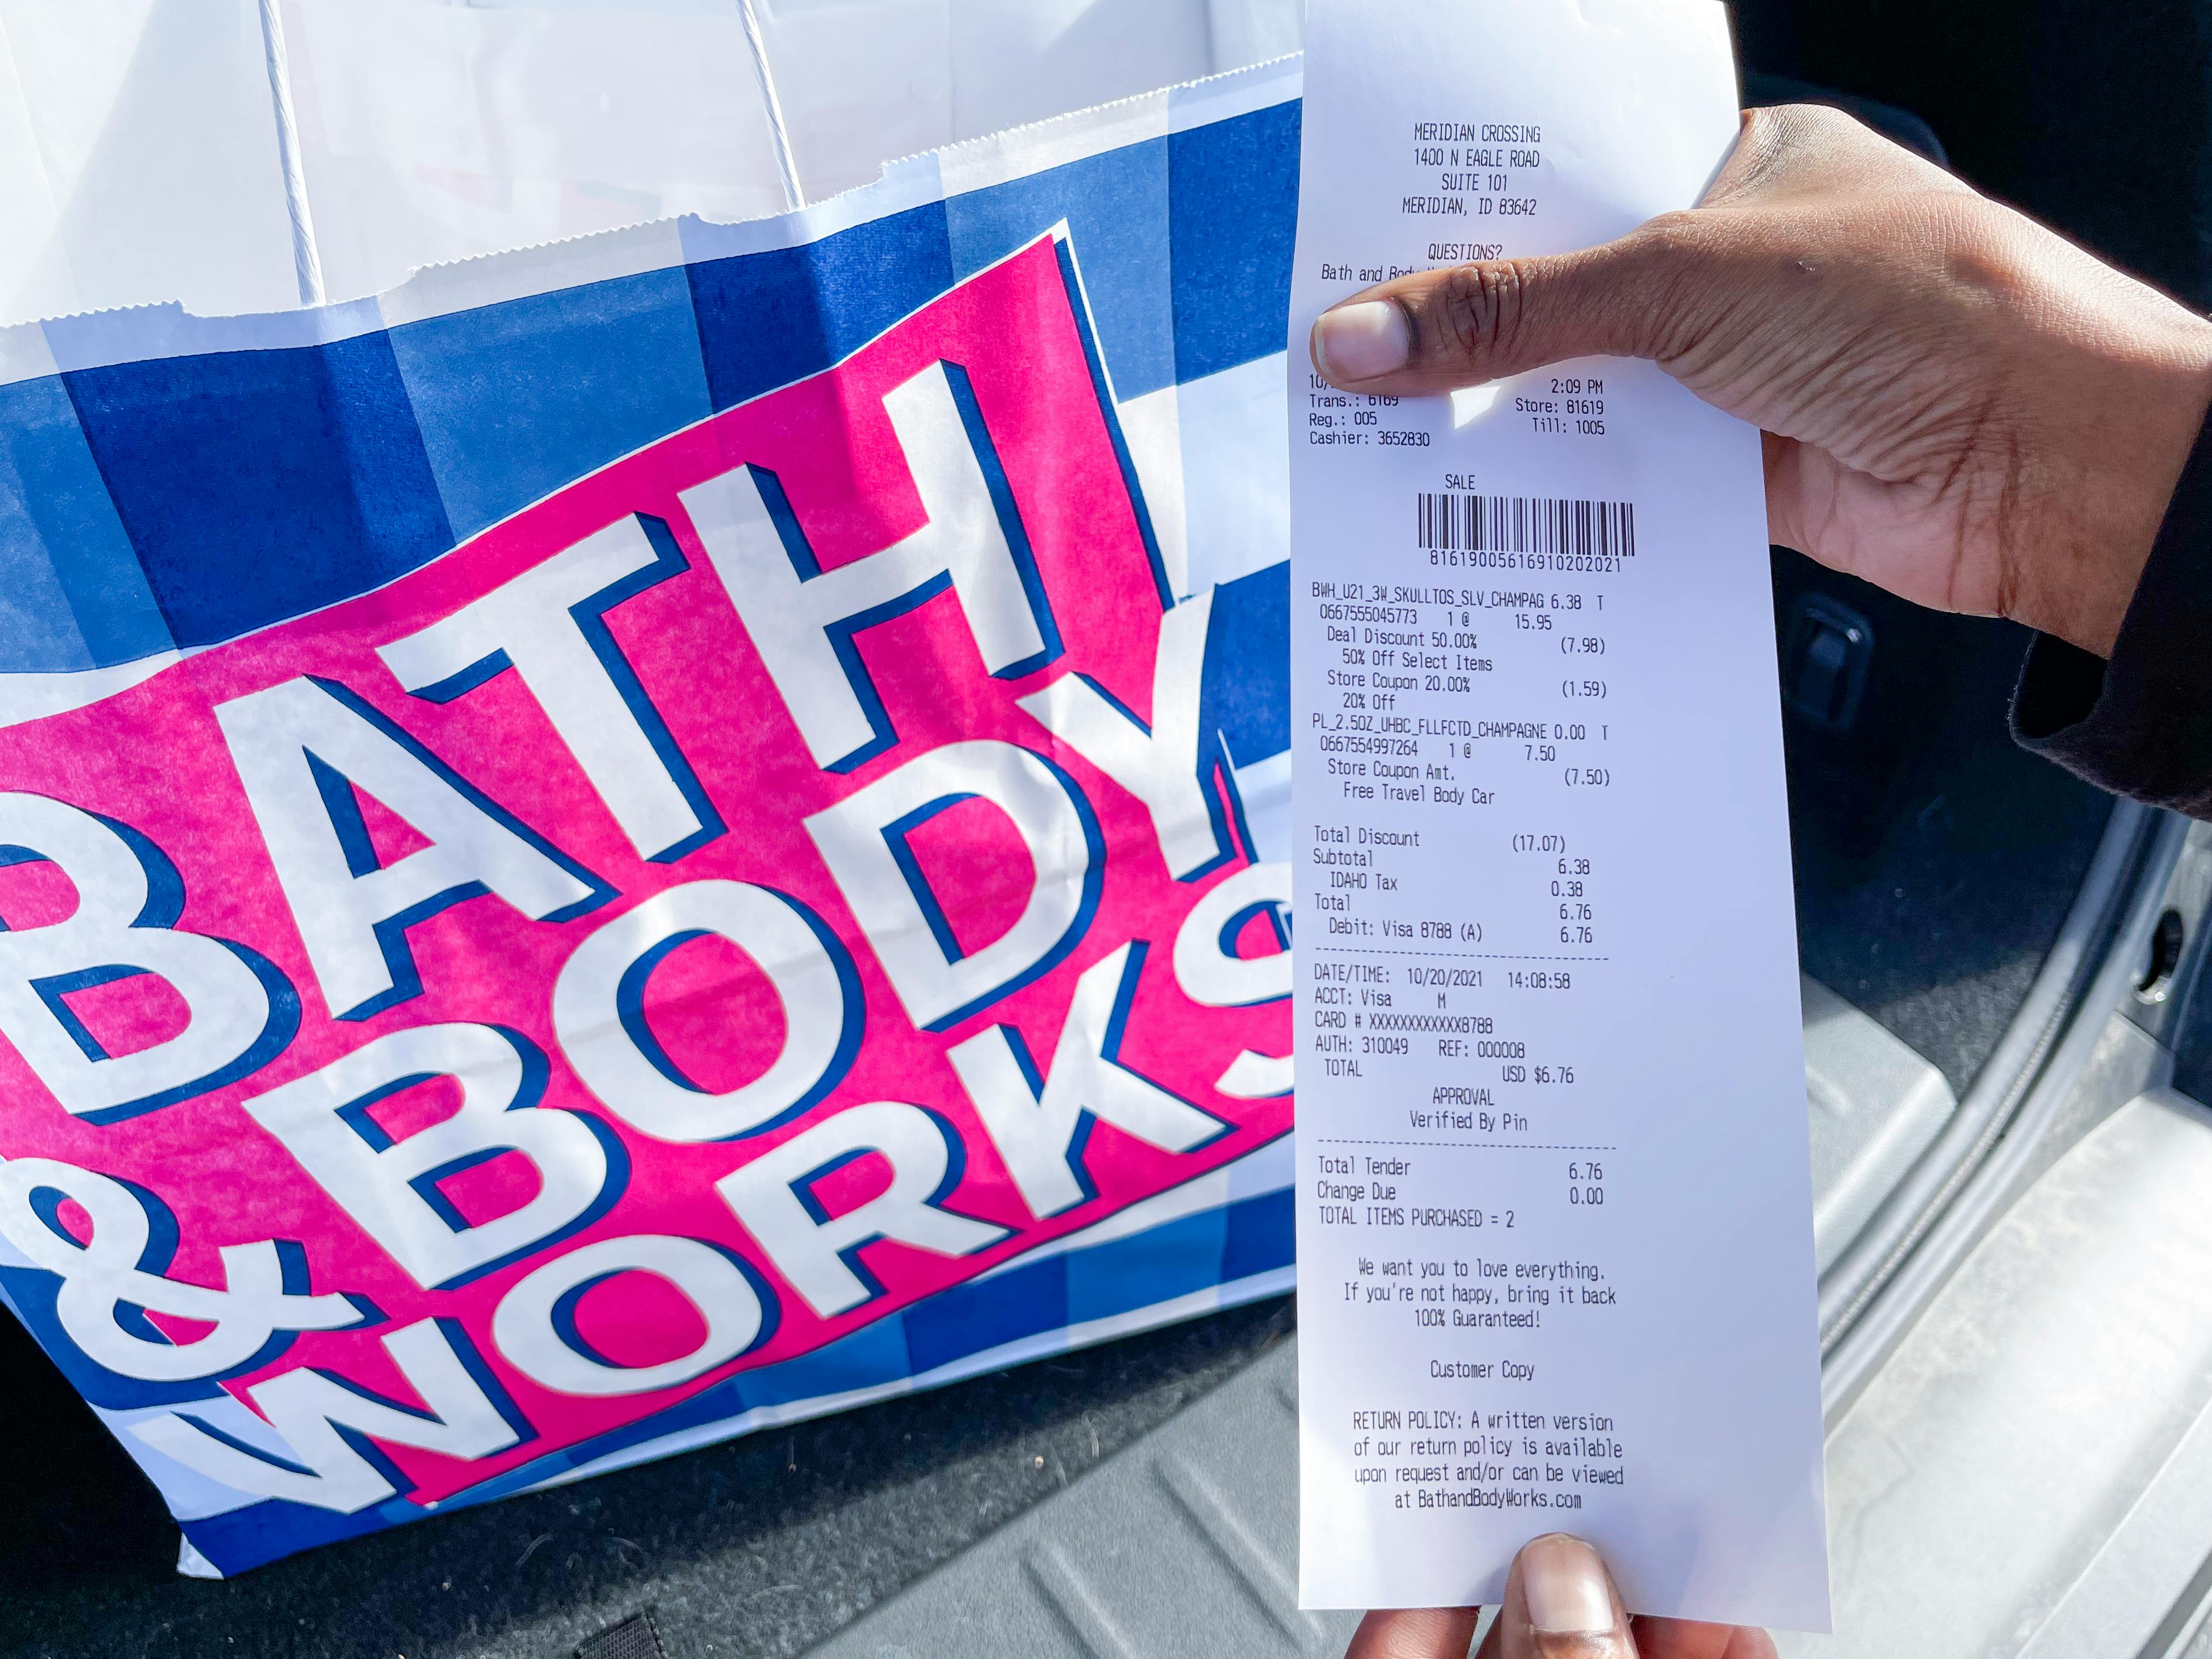 Bath & Body Works Semi-Annual sale is underway with deals up to 75% off